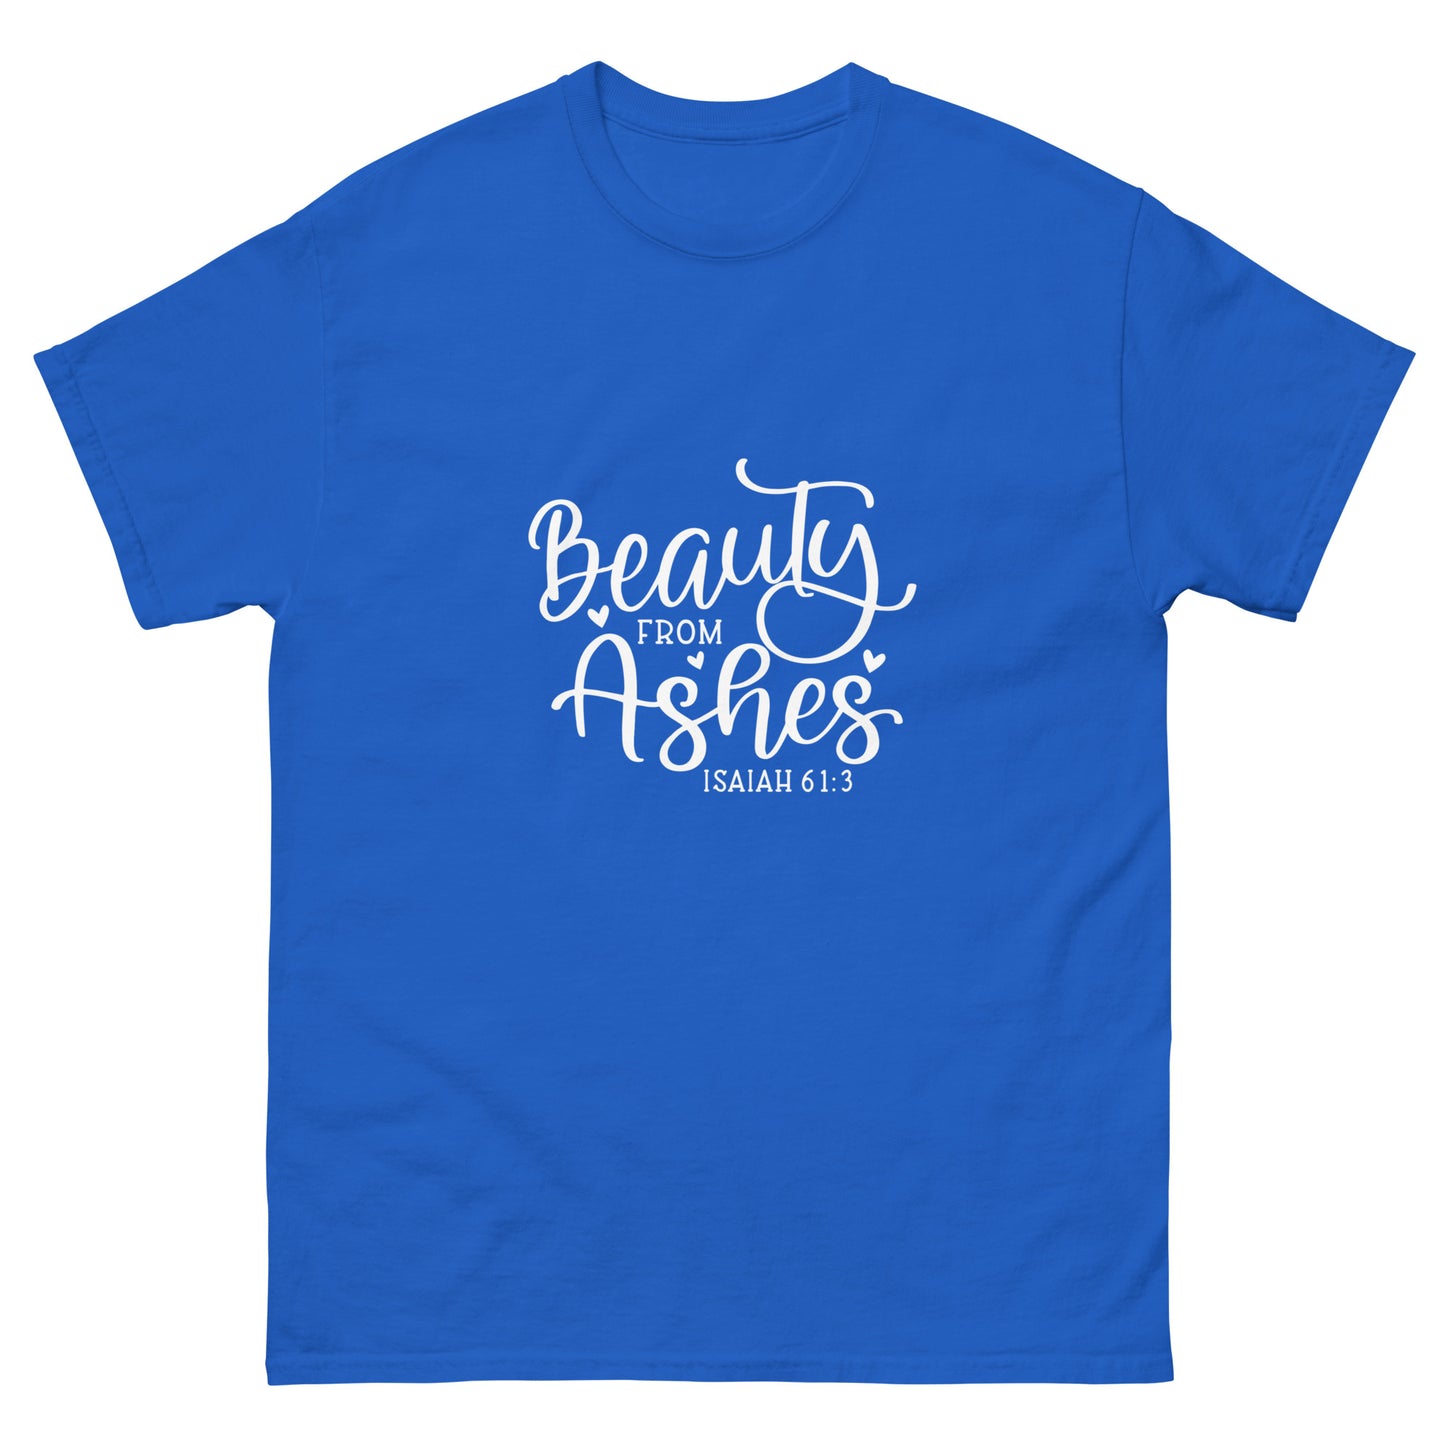 Beauty from Ashes - classic tee